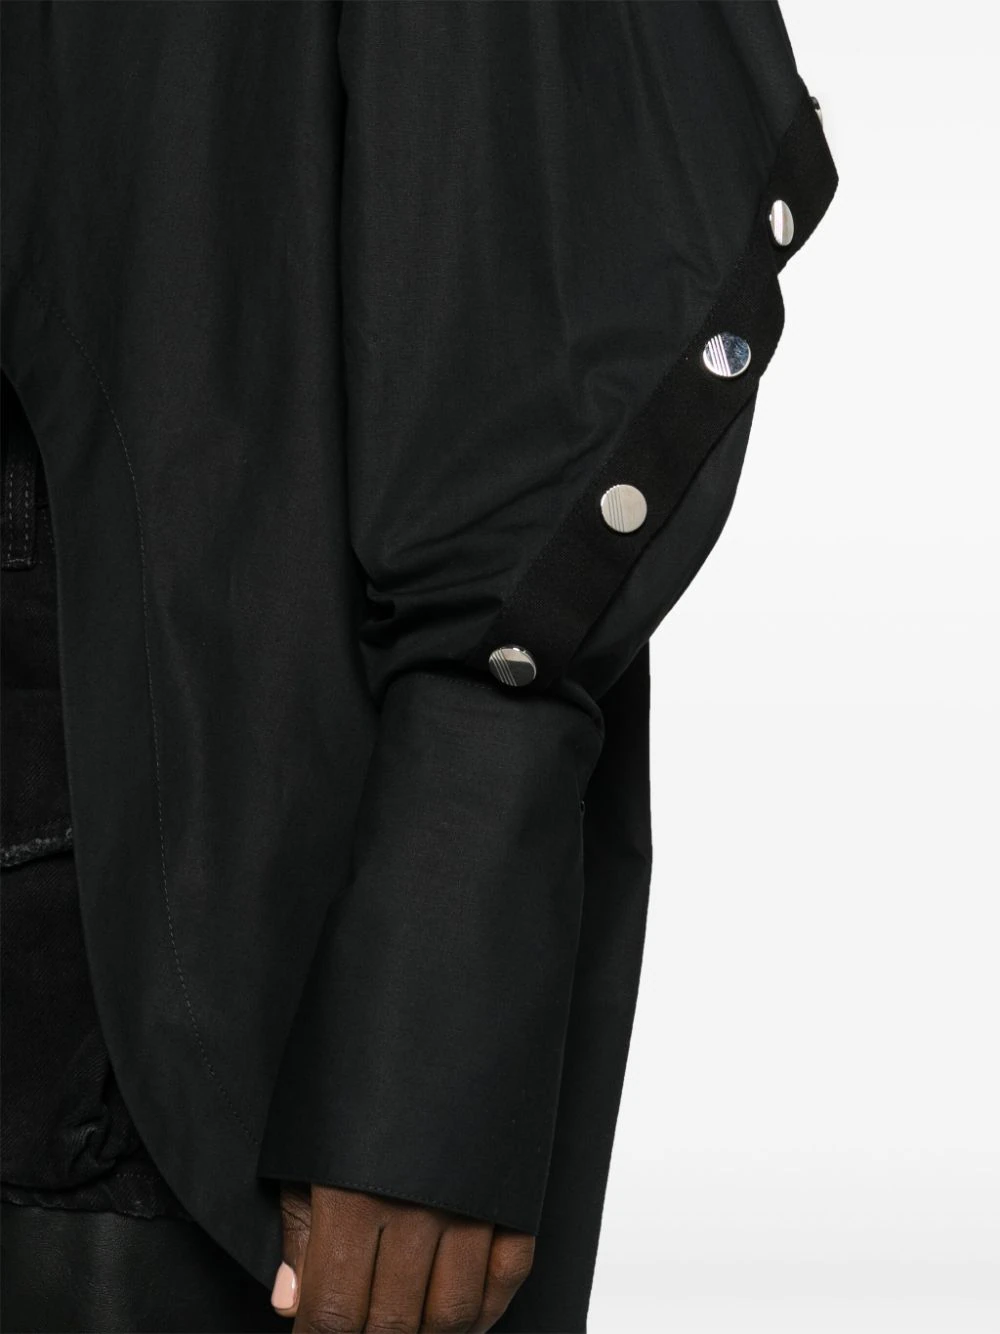 The-Attico-Shirt-With-Back-Snap-Details-Black-5